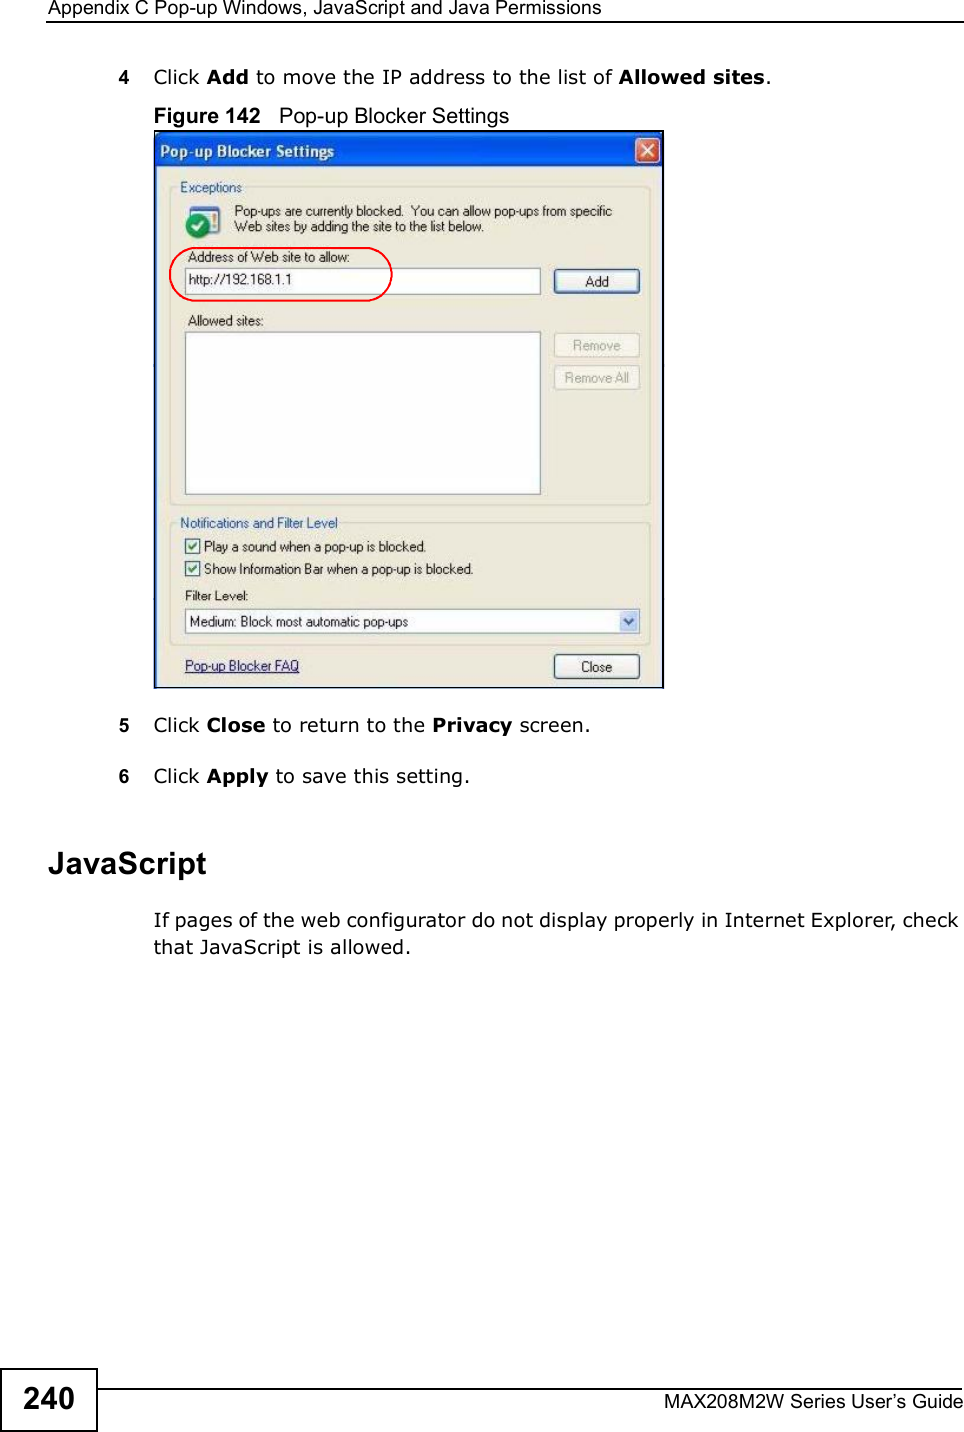 Appendix CPop-up Windows, JavaScript and Java PermissionsMAX208M2W Series User s Guide2404Click Add to move the IP address to the list of Allowed sites.Figure 142   Pop-up Blocker Settings5Click Close to return to the Privacy screen. 6Click Apply to save this setting. JavaScriptIf pages of the web configurator do not display properly in Internet Explorer, check that JavaScript is allowed. 